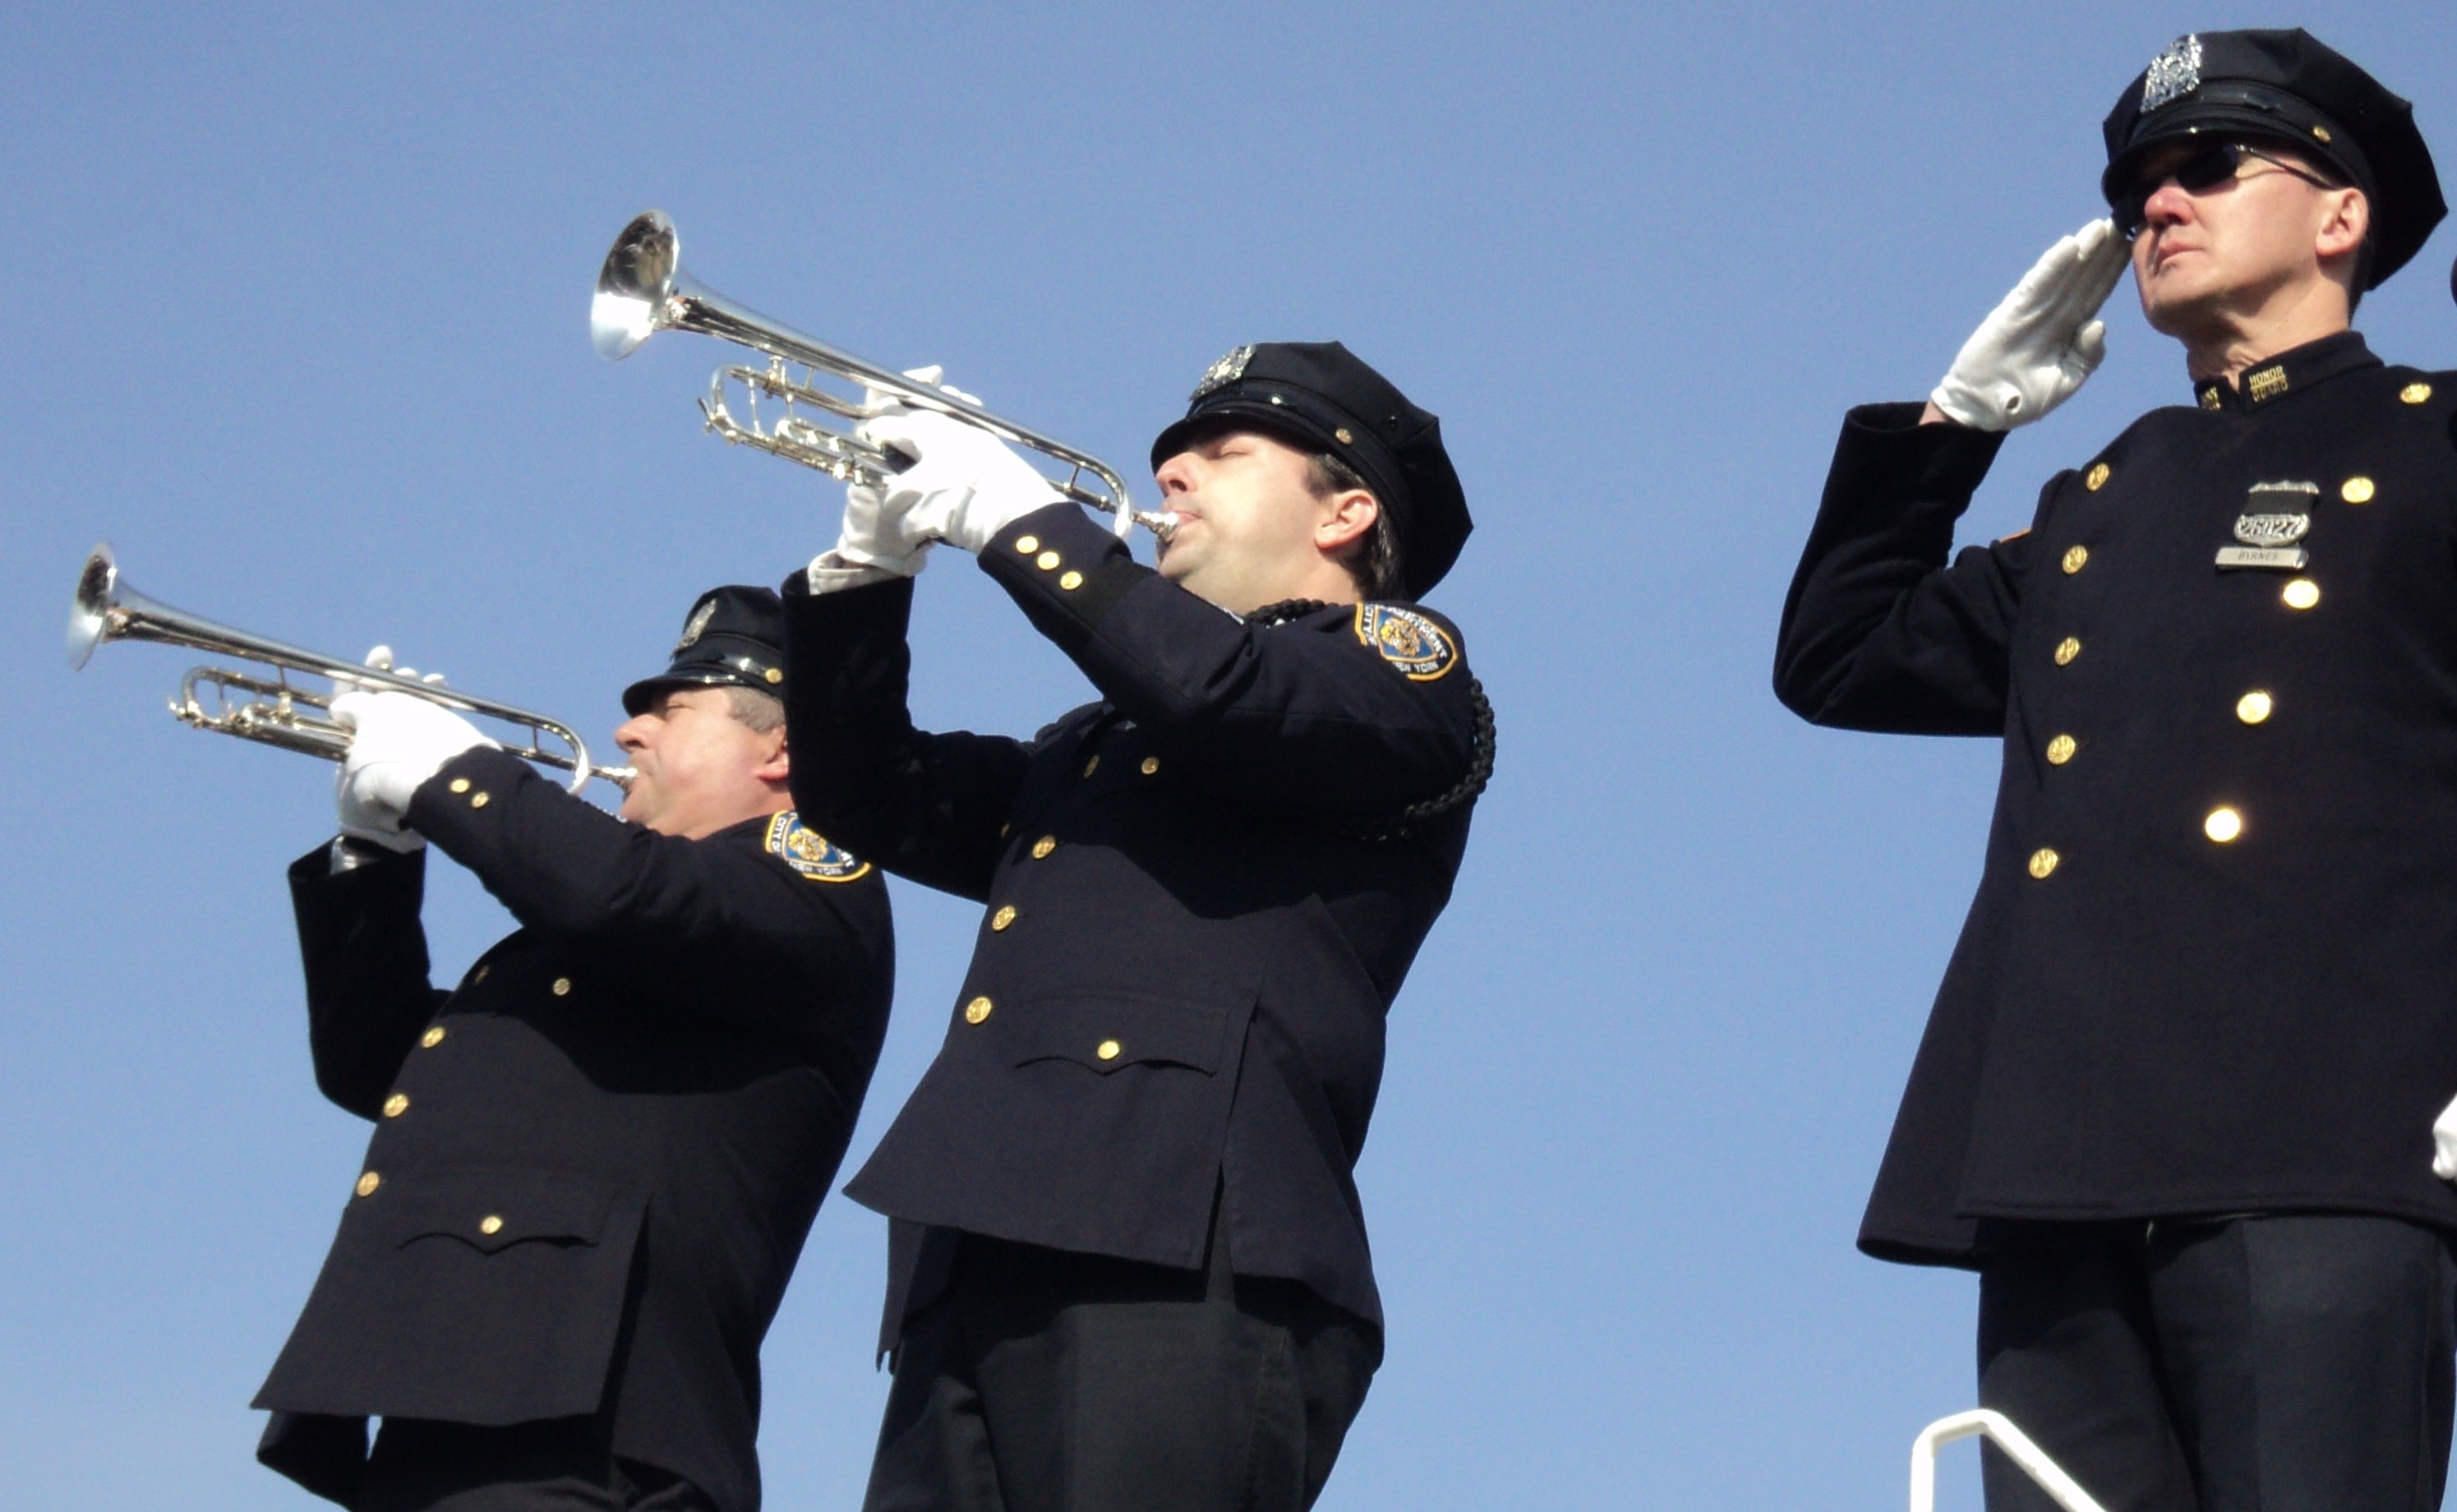 NYPD officers play Taps for fallen New York City Police Officer Alain Schaberger in East Islip